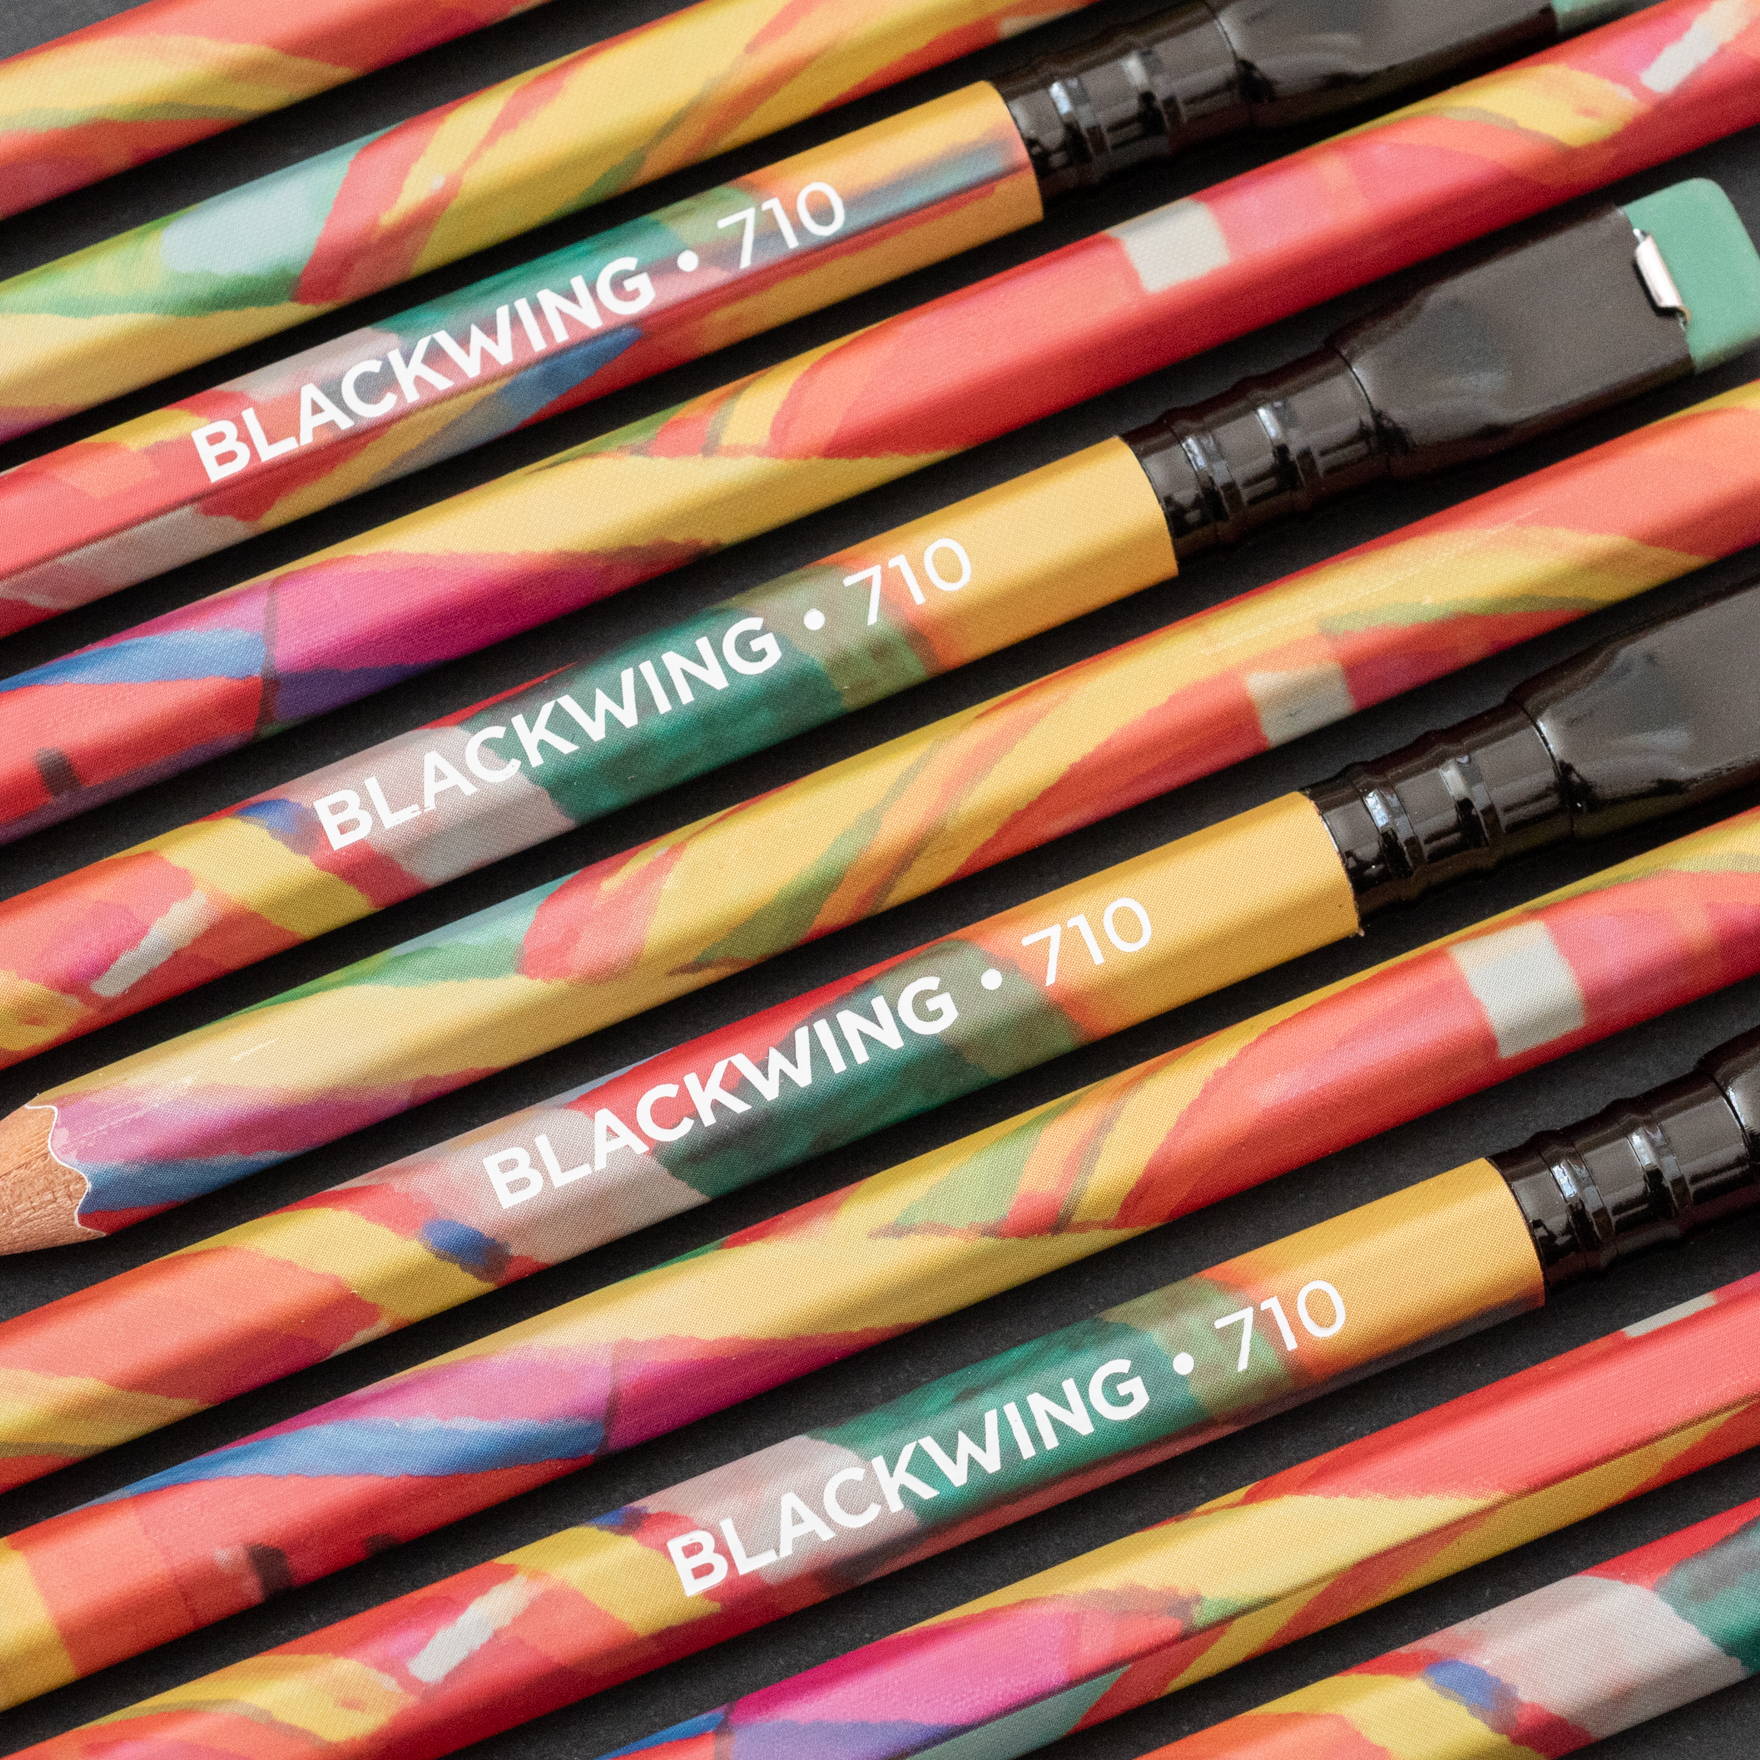 Close up of Blackwing 710 pencils